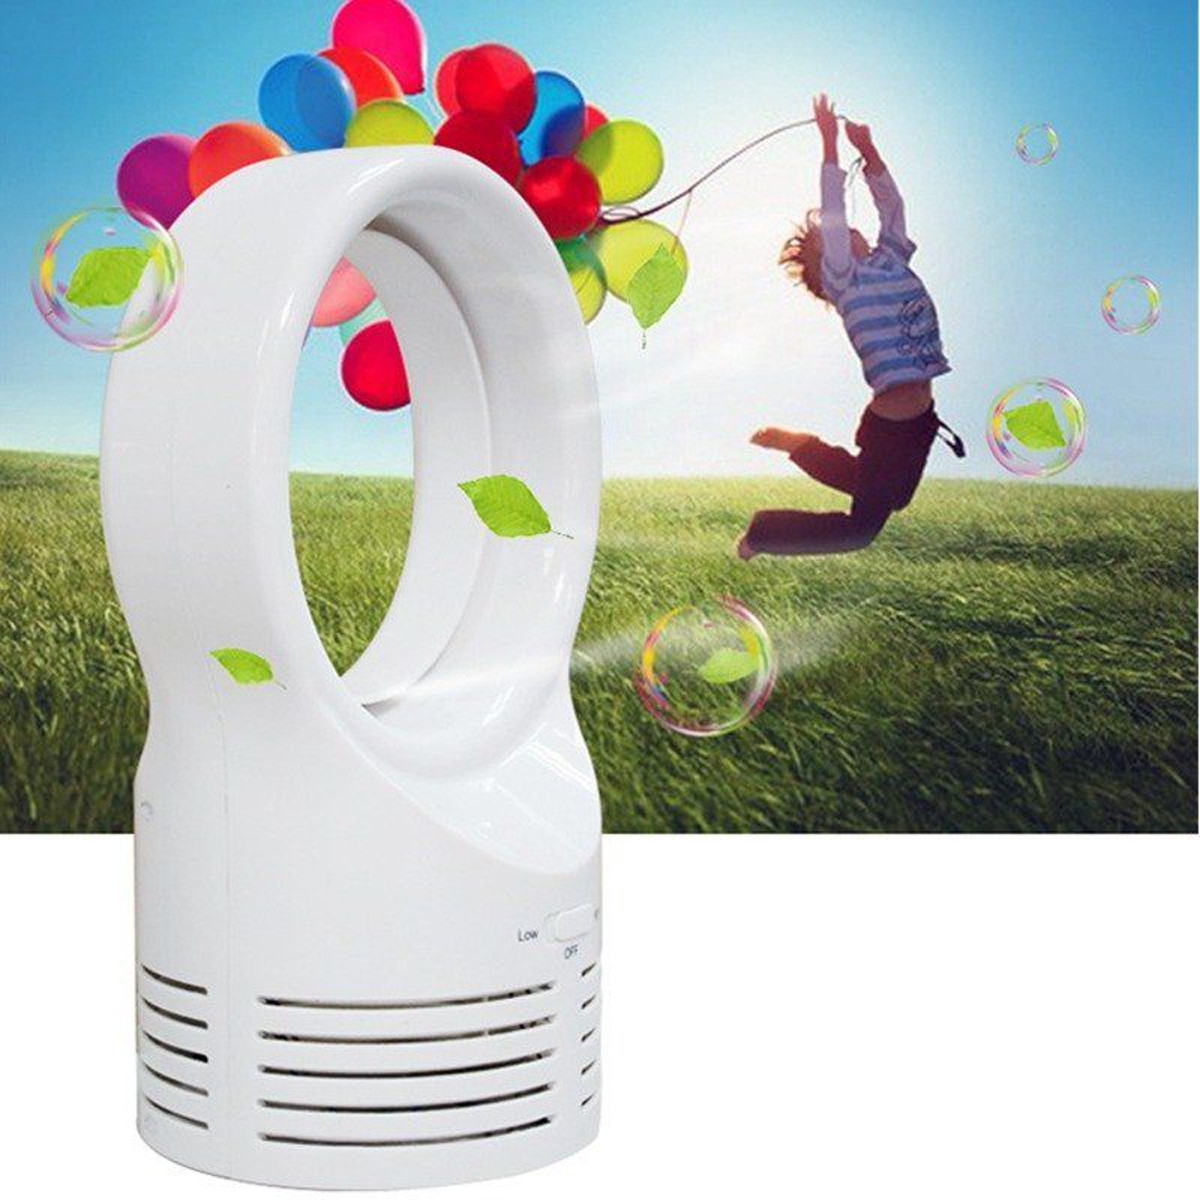 12V-Portable-USB-Bladeless-Fan-Electric-Table-Mini-Bladeless-Cooling-Air-Conditioner-With-Adapter-1362955